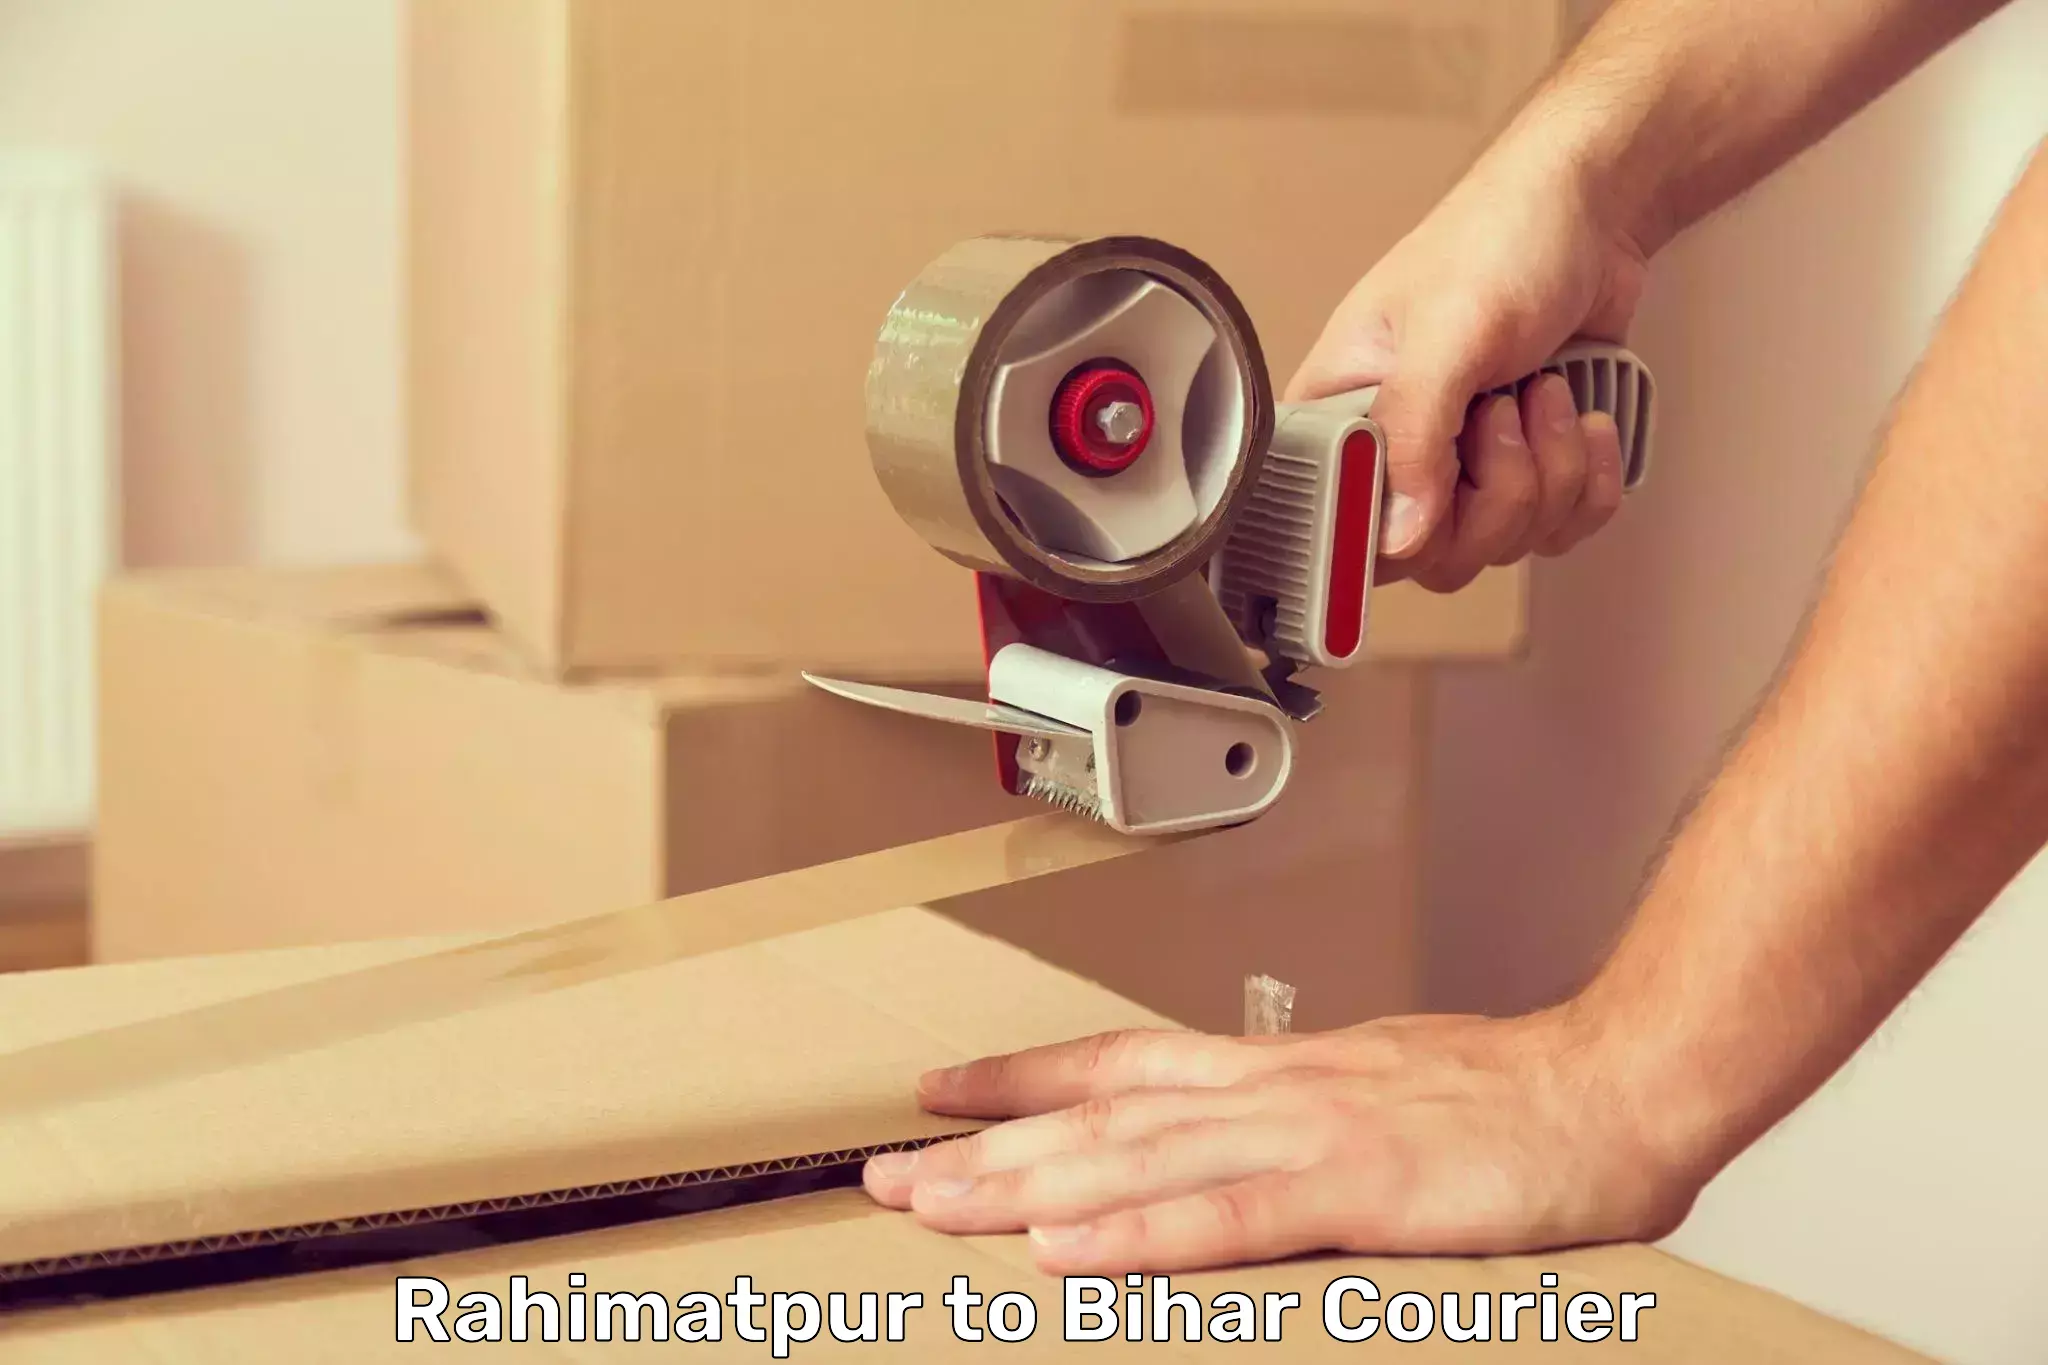 Advanced package delivery Rahimatpur to Bihar